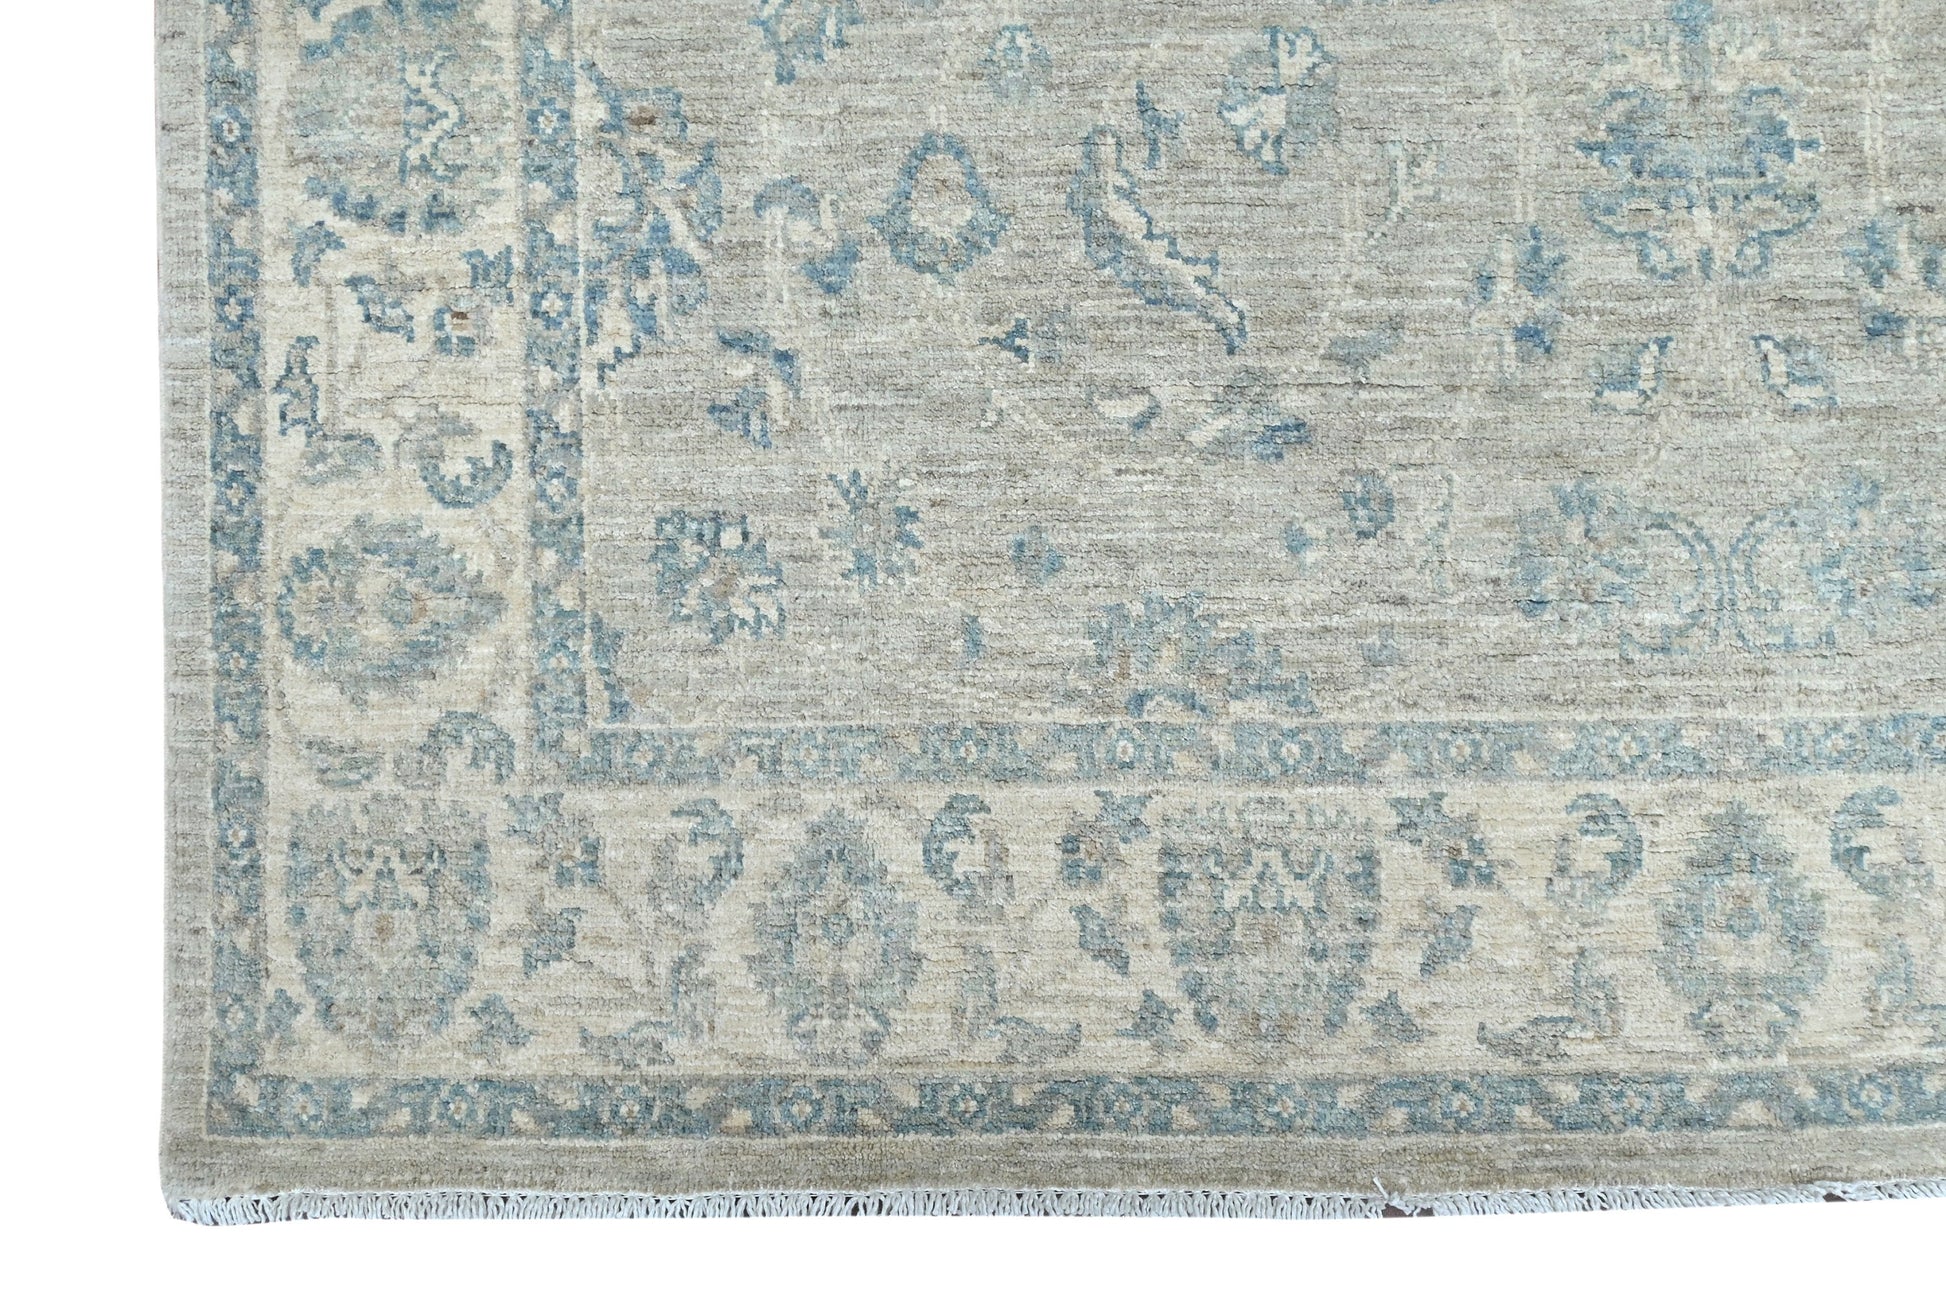 Faryab Lotus Gardens Carpet | 8'1" x 5'5" | Home Decor | Hand-knotted Wool Area Rug